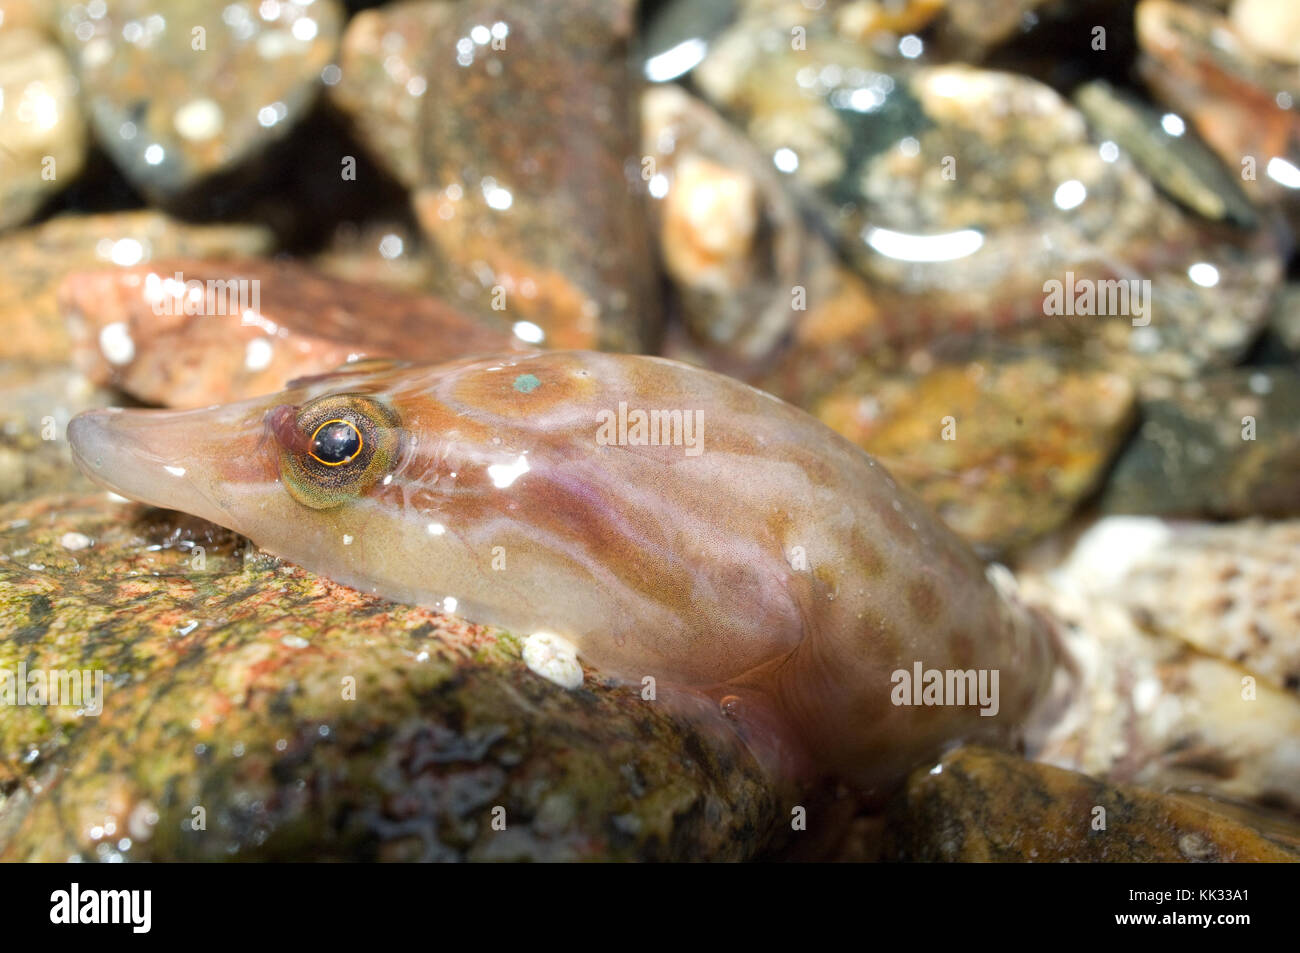 Shore clingfish (Lepadogaster lepadogaster), also a Cornish sucker on a stone in a rock pool off the tip of Lizard Point, Cornwall, UK. Stock Photo